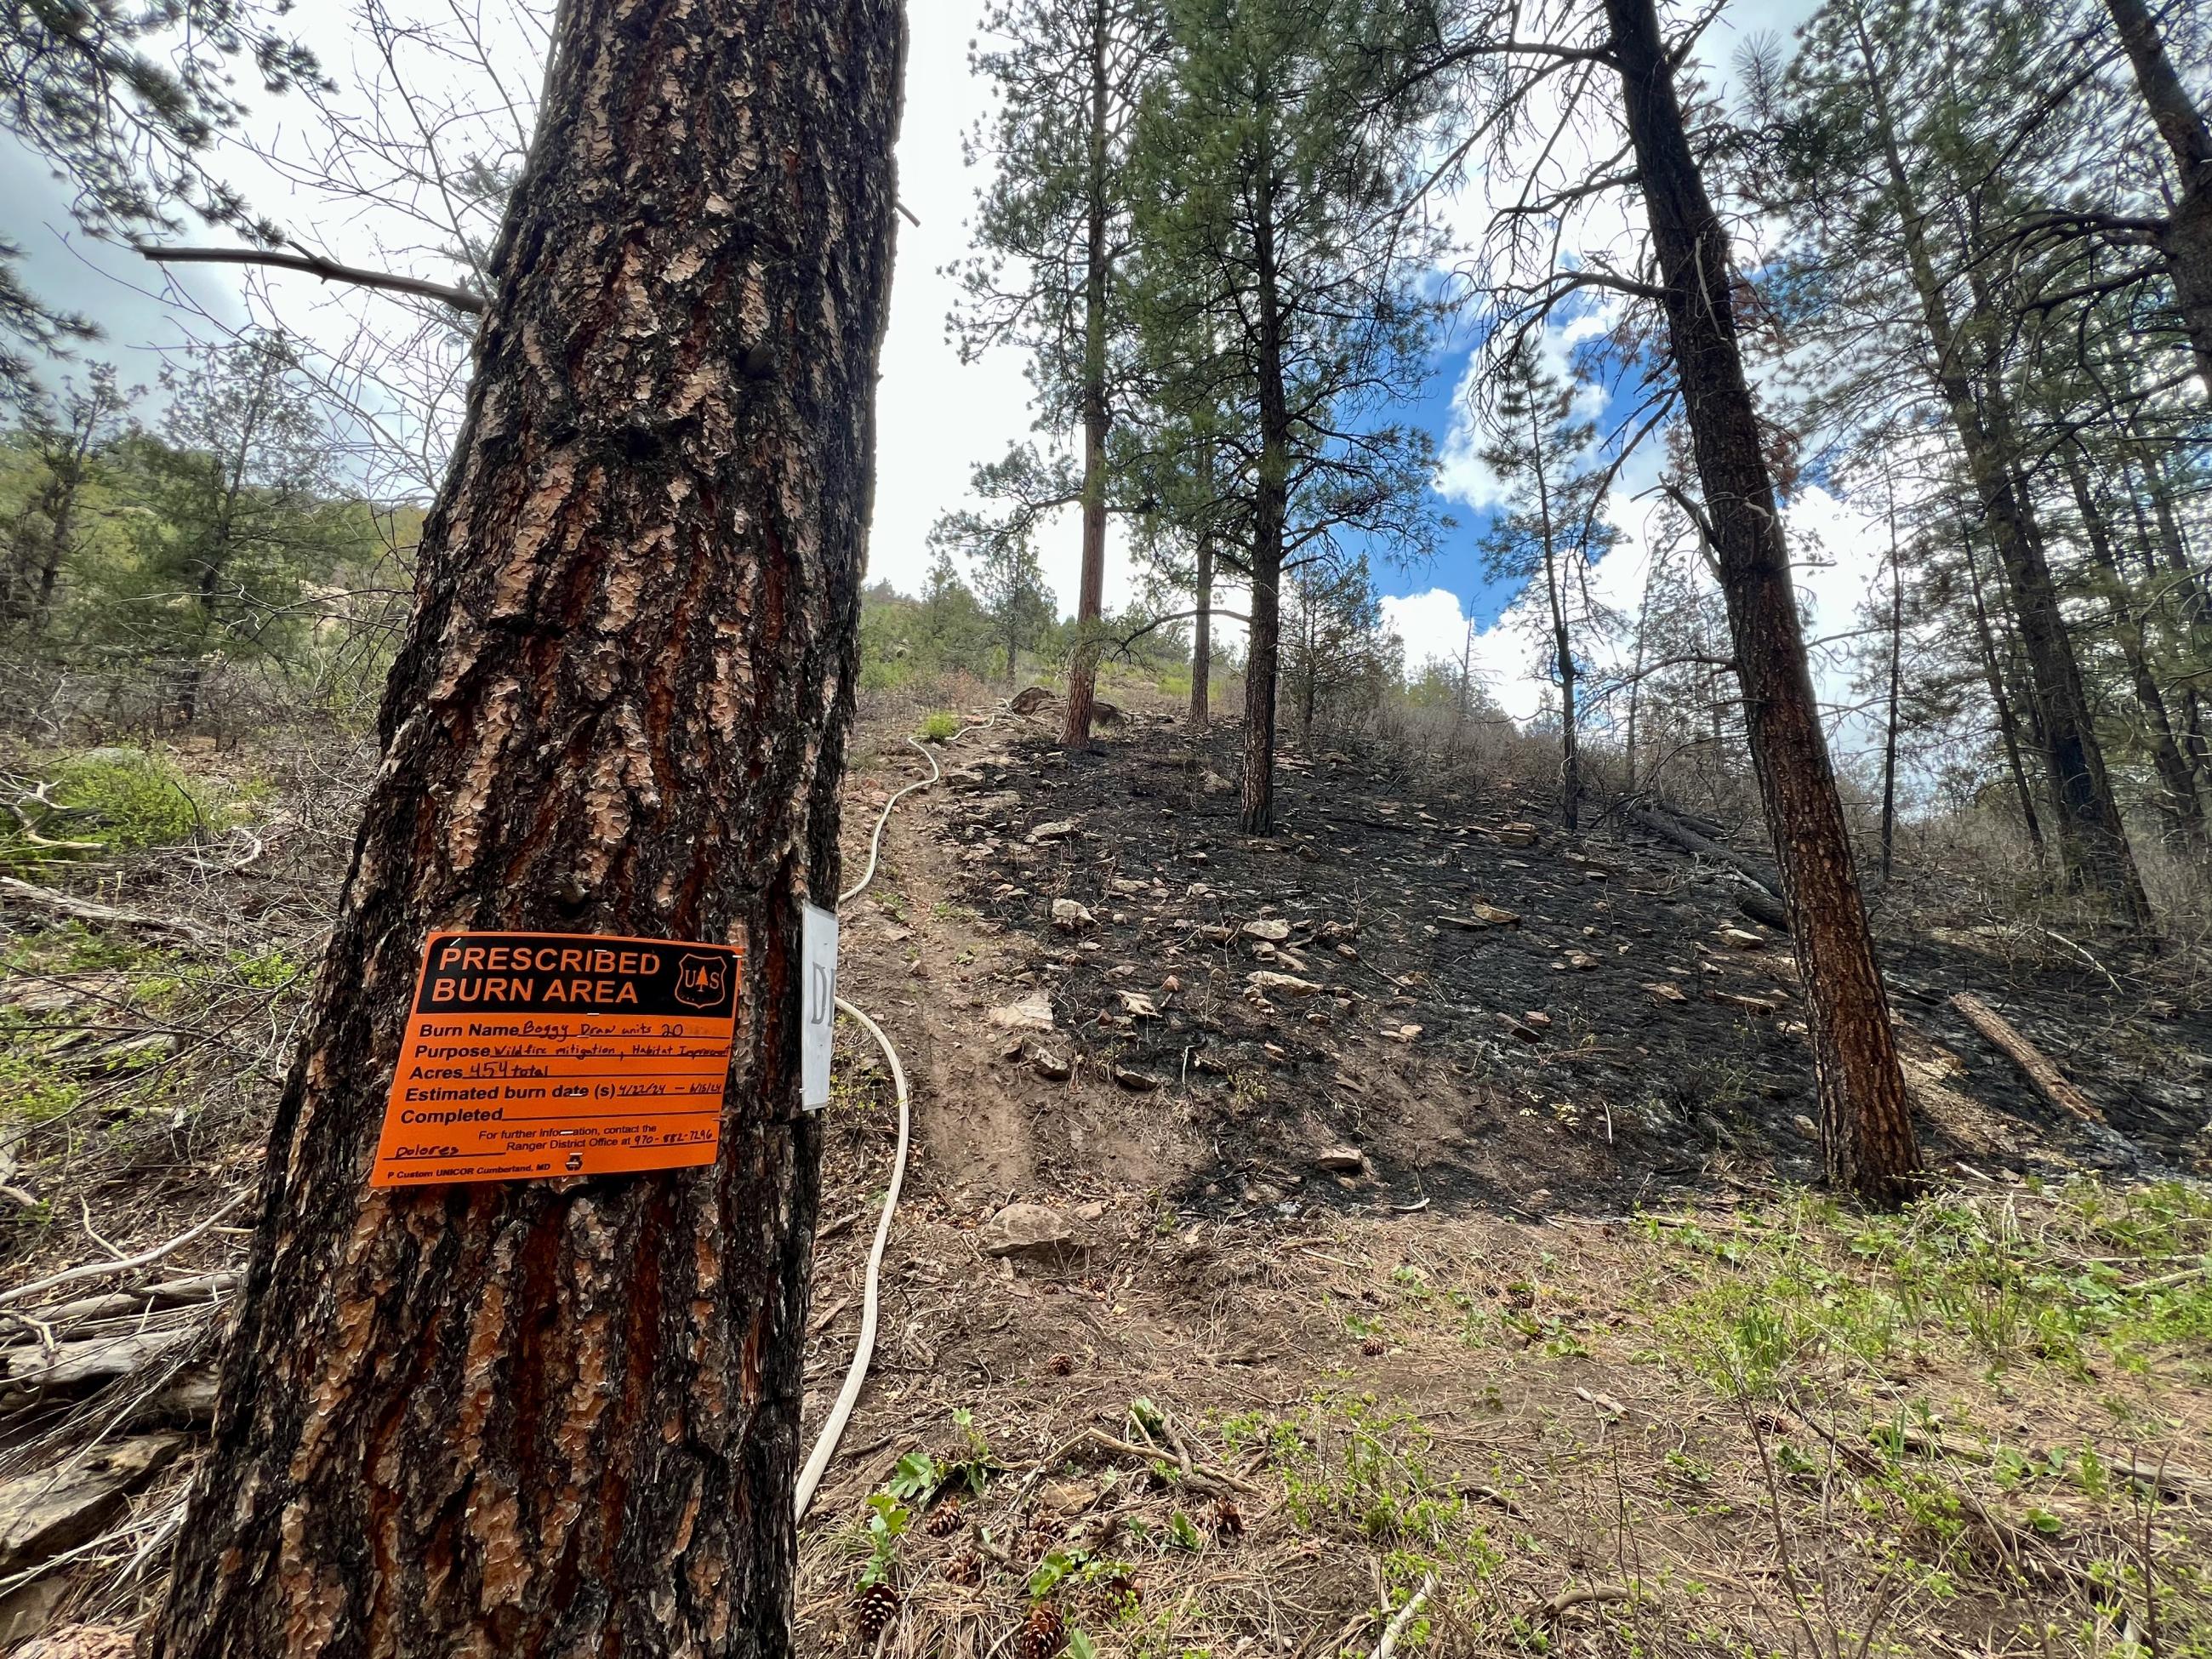 A ponderosa pine with an orange sign is in the foreground left with a burned area on a slope to the right.